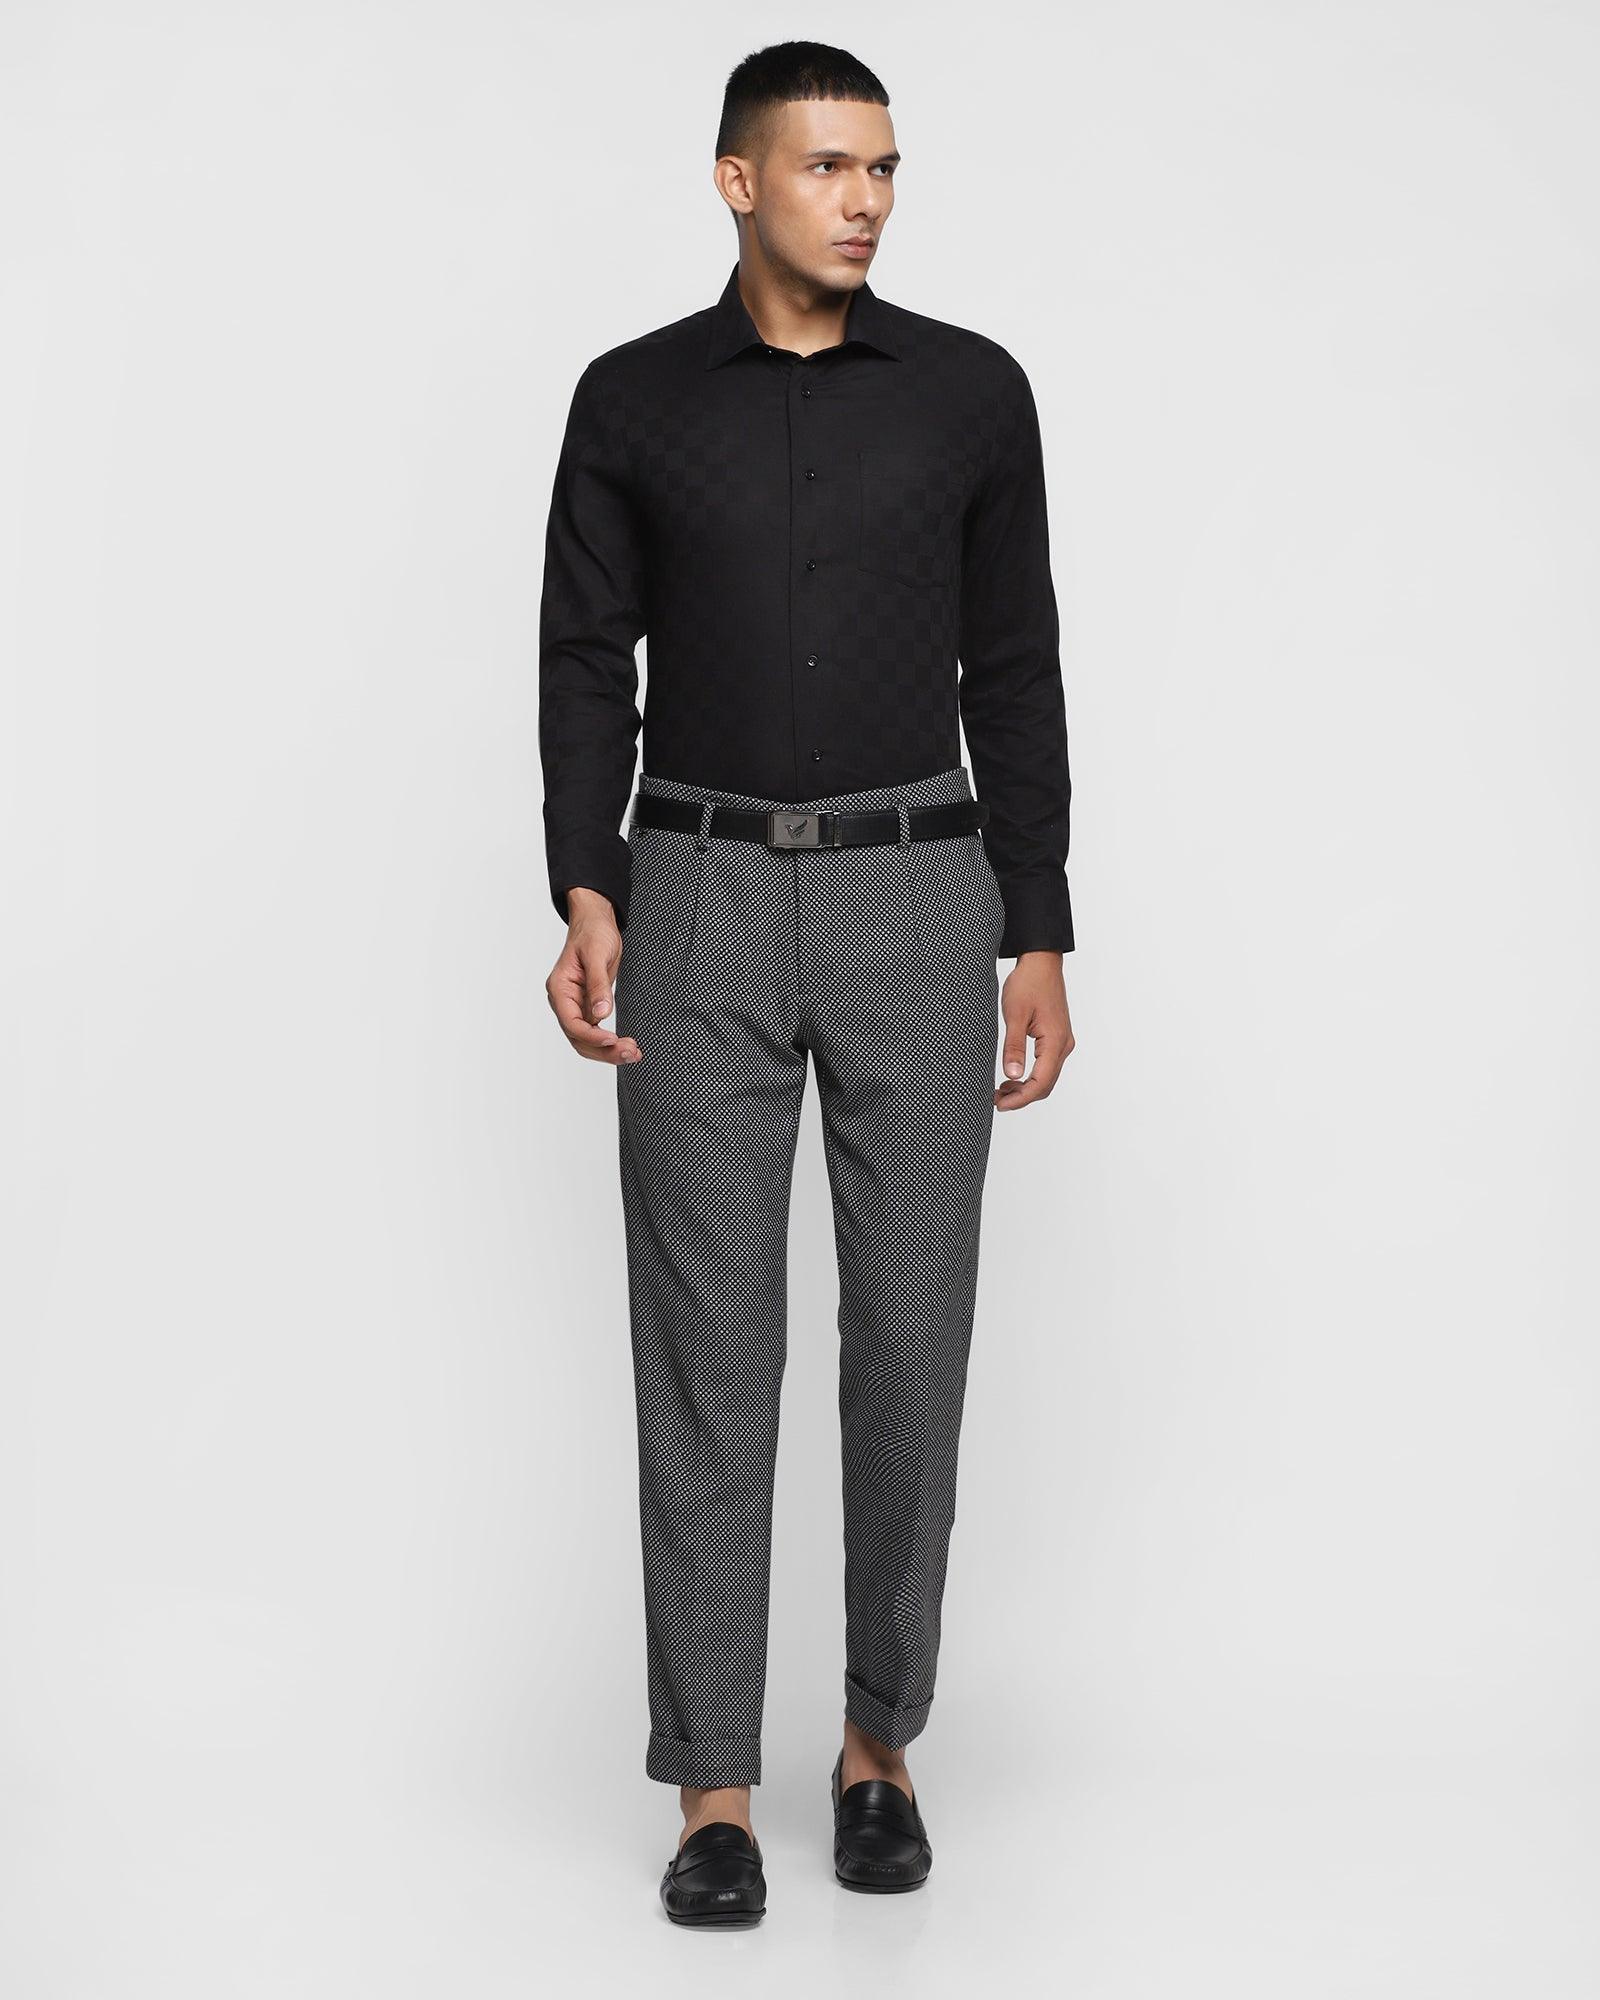 Which should be the best trouser colour for Black shirt for interview? -  Quora